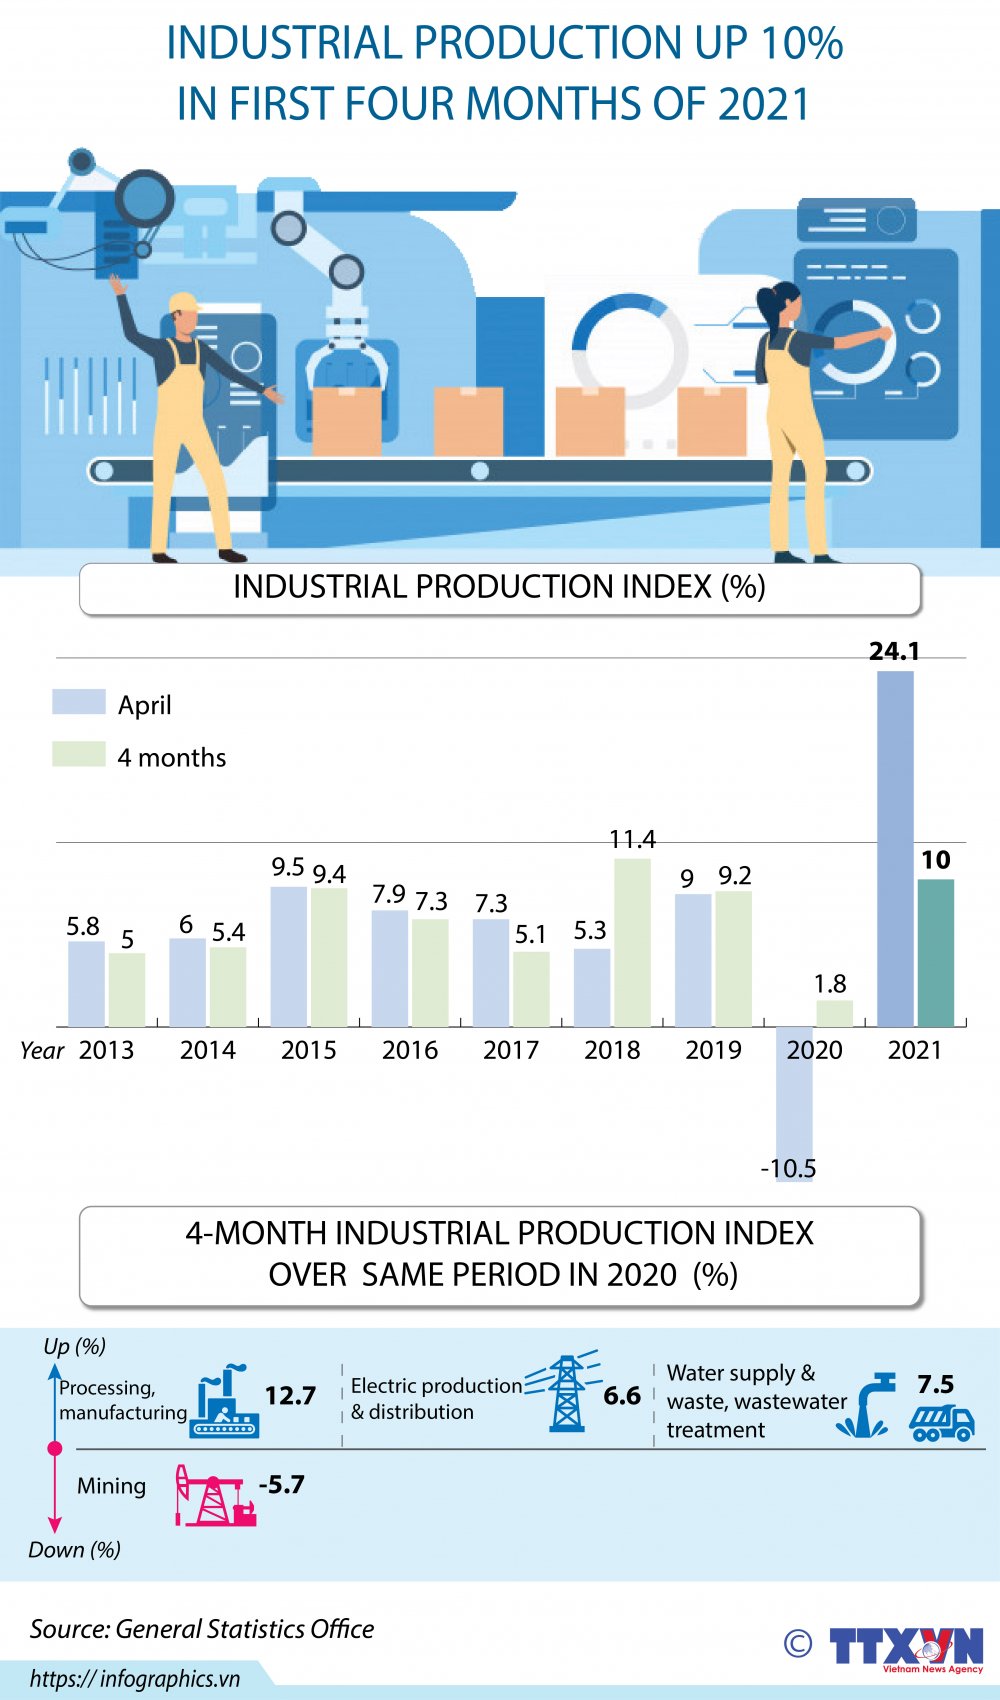 Industrial production up 10% in first four months of 2021